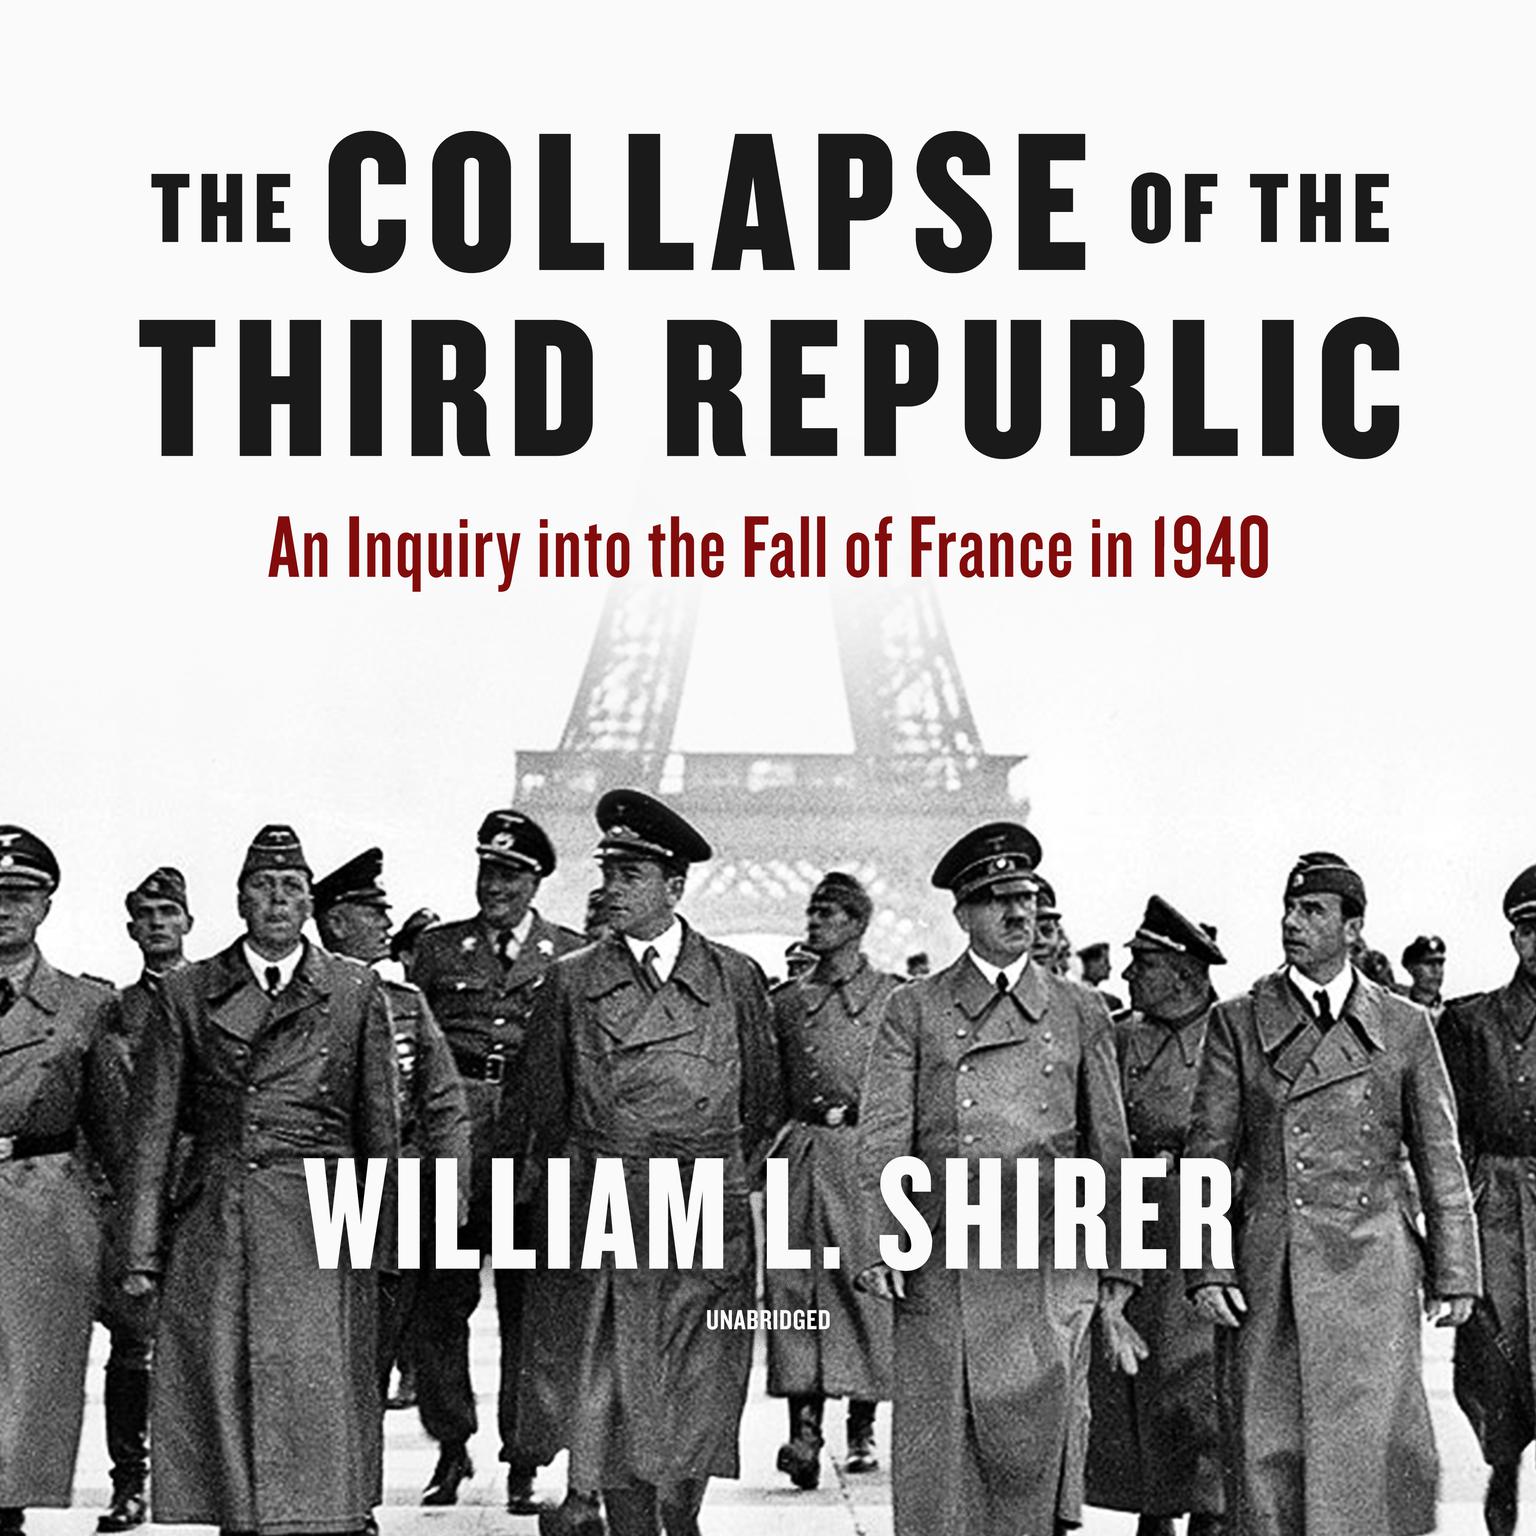 The Collapse of the Third Republic: An Inquiry into the Fall of France in 1940 Audiobook, by William L. Shirer